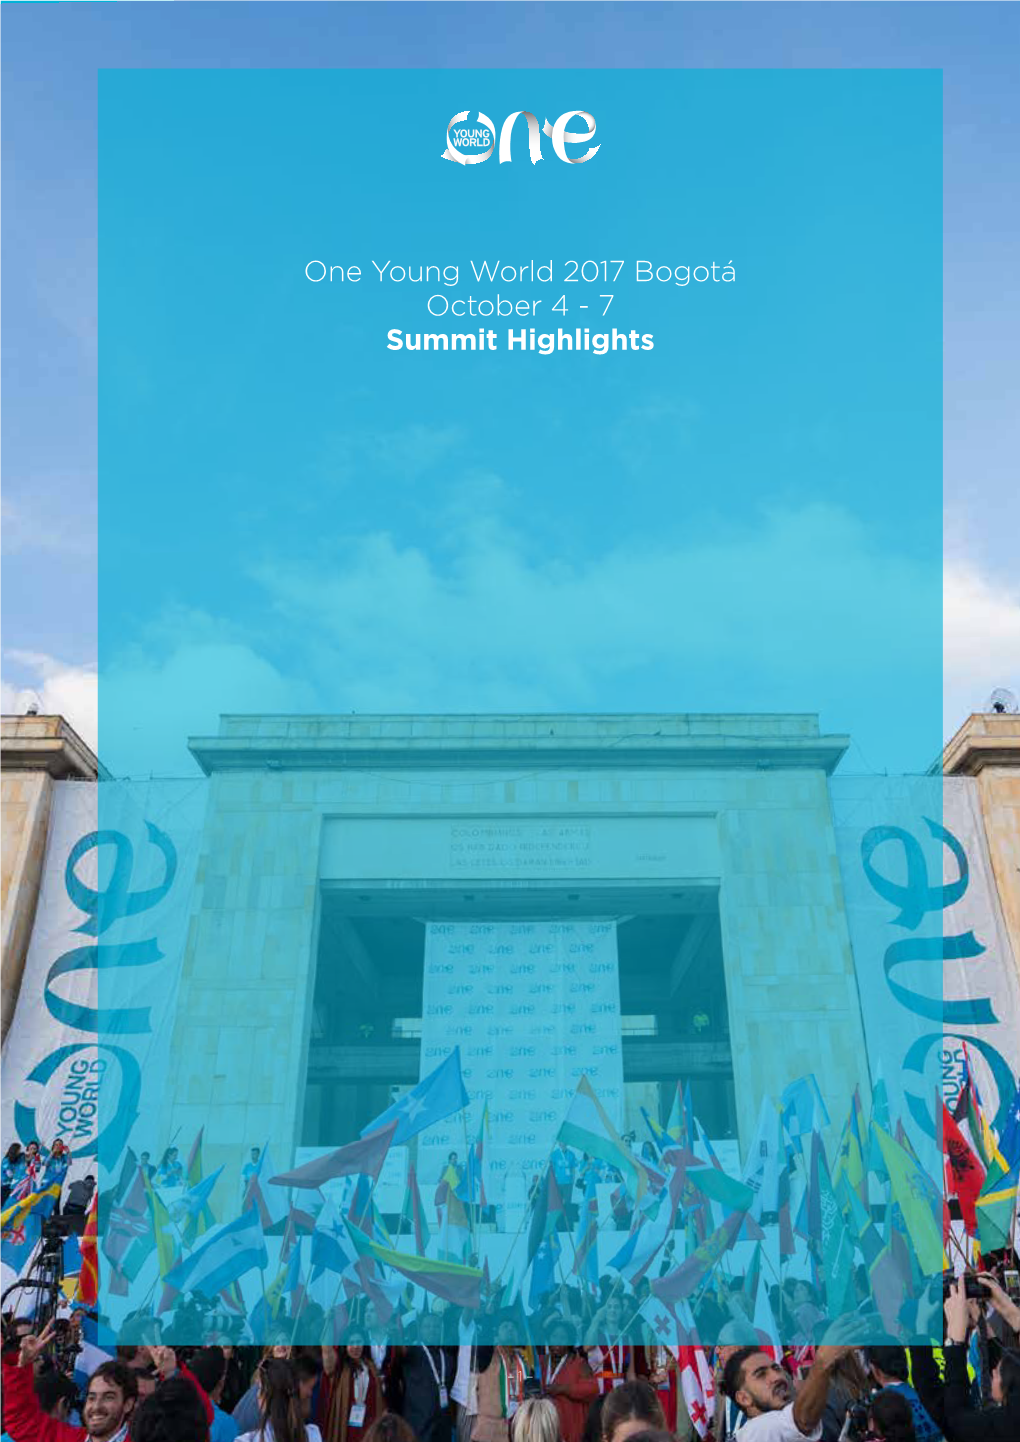 One Young World 2017 Bogotá October 4 - 7 Summit Highlights